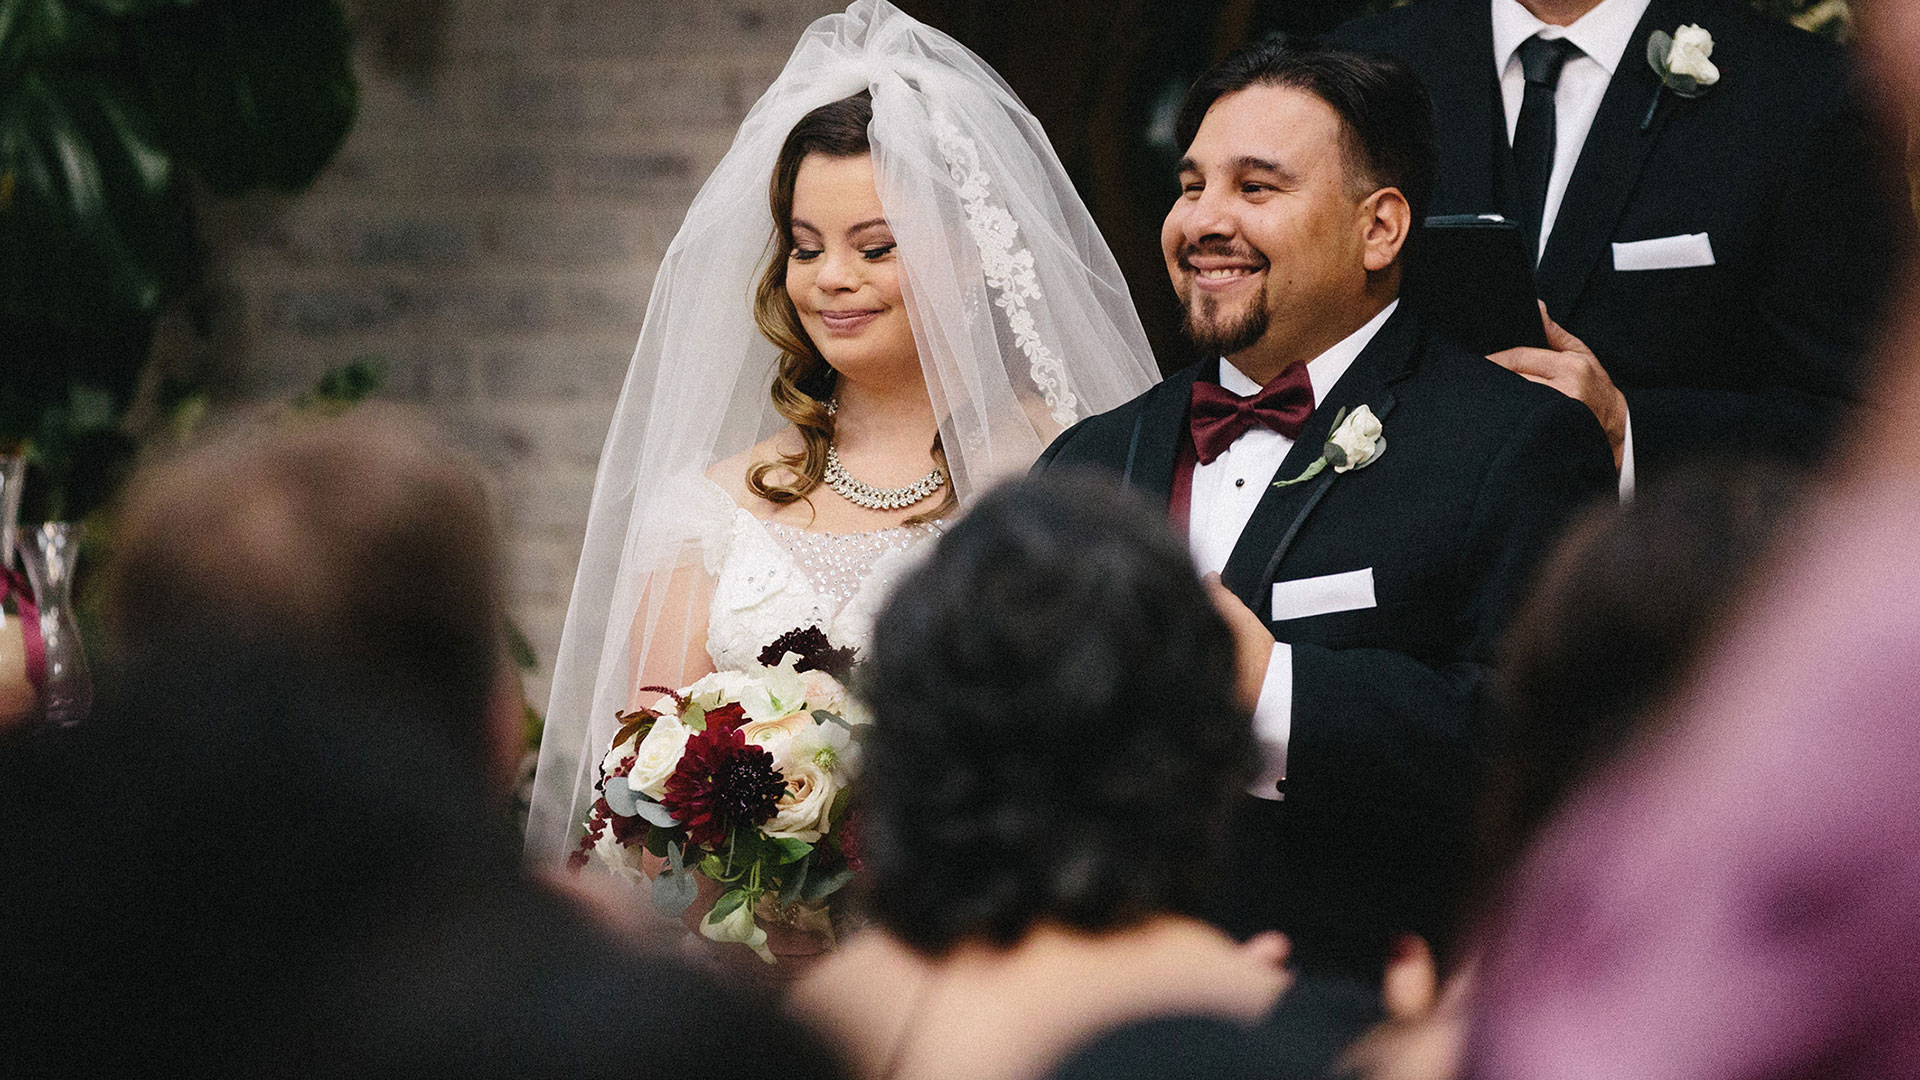 Cristina and Angel get married on Born This Way